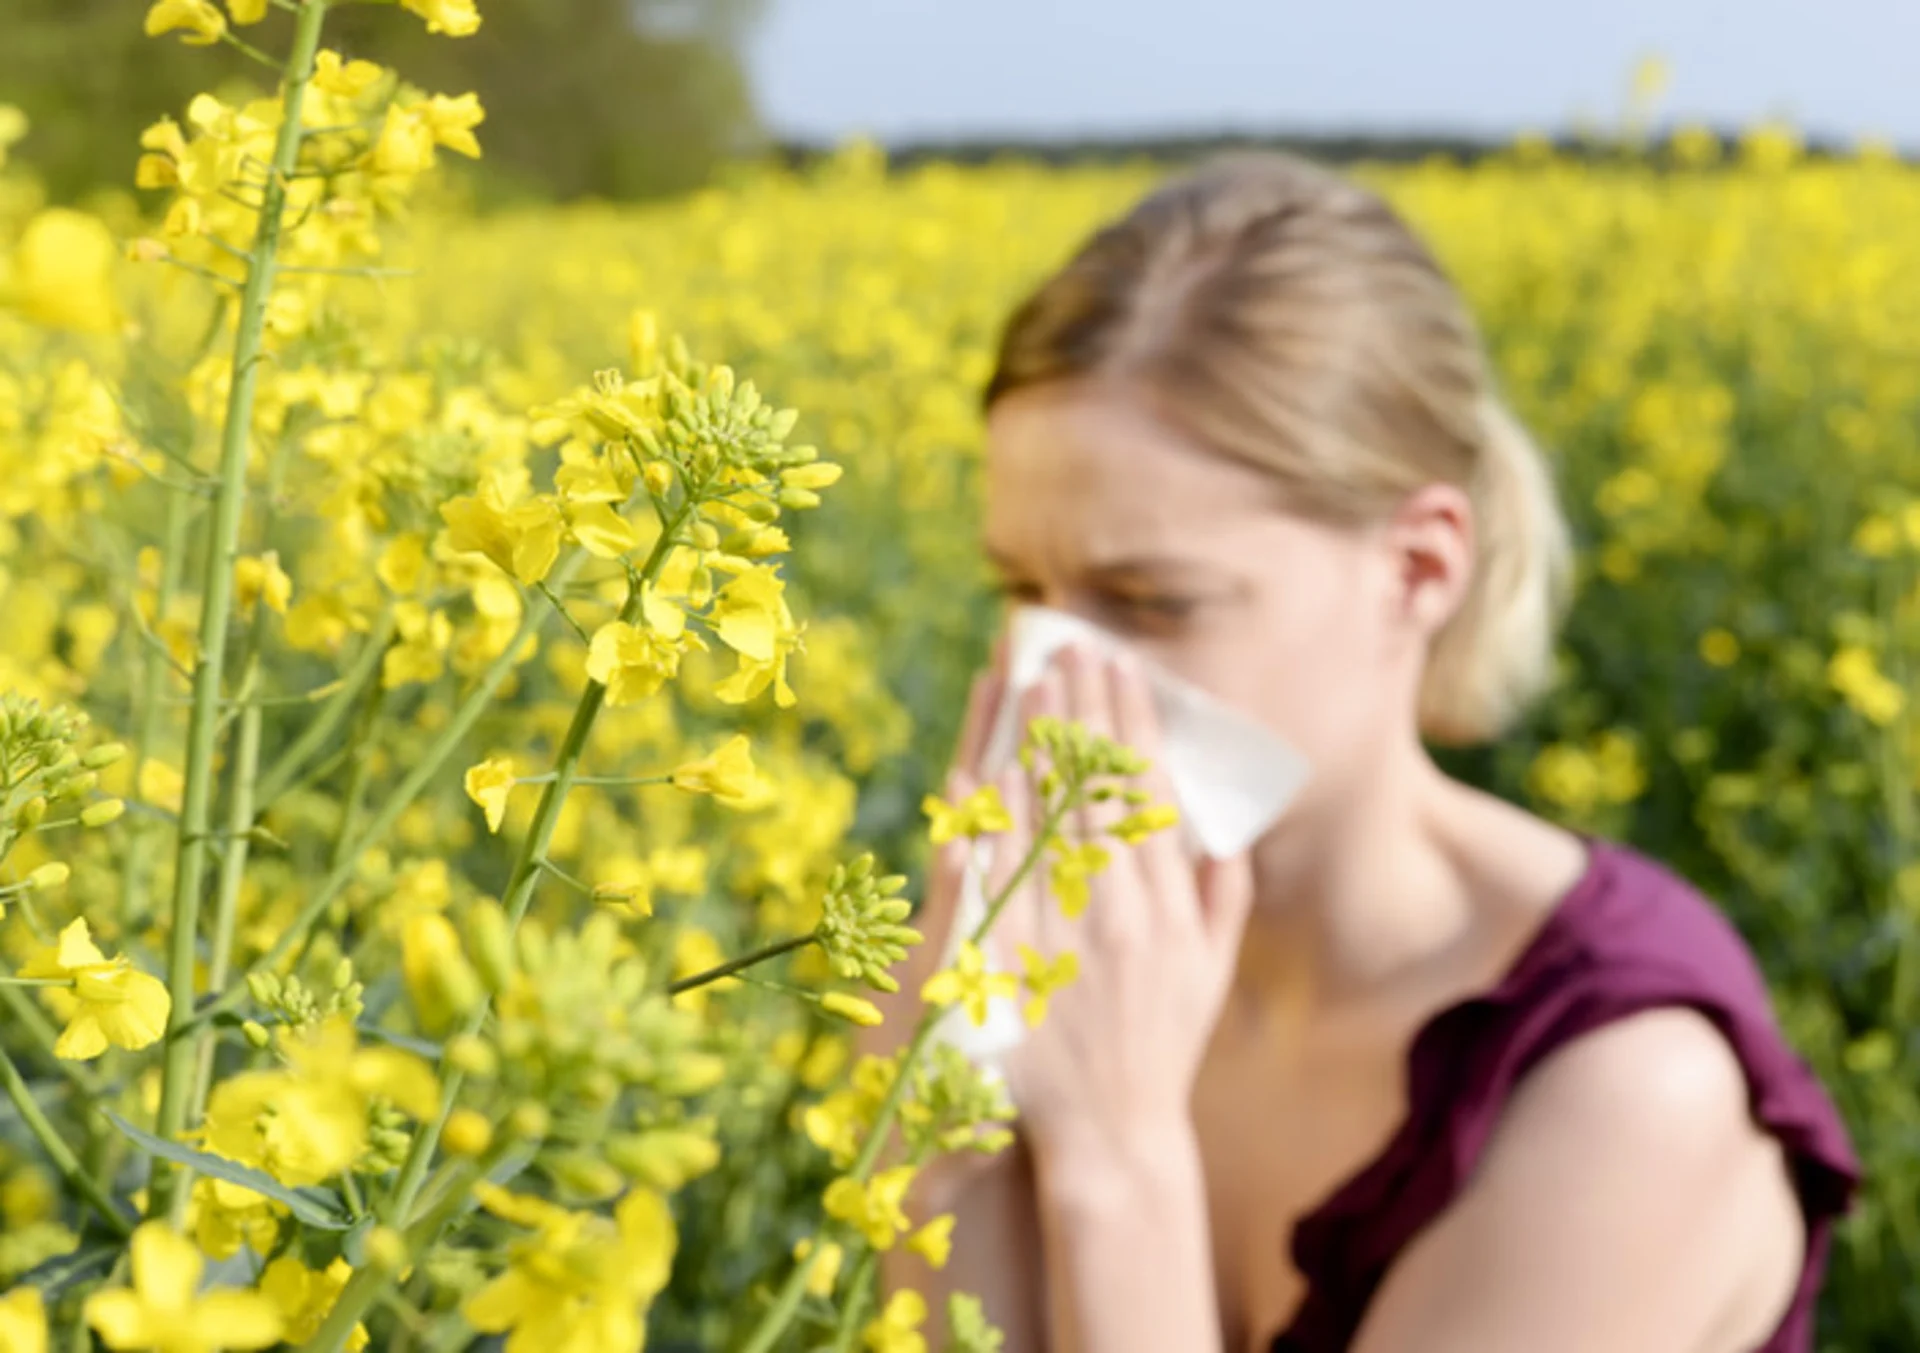 Brace yourself, this year's allergy season could get even worse. Here's why!